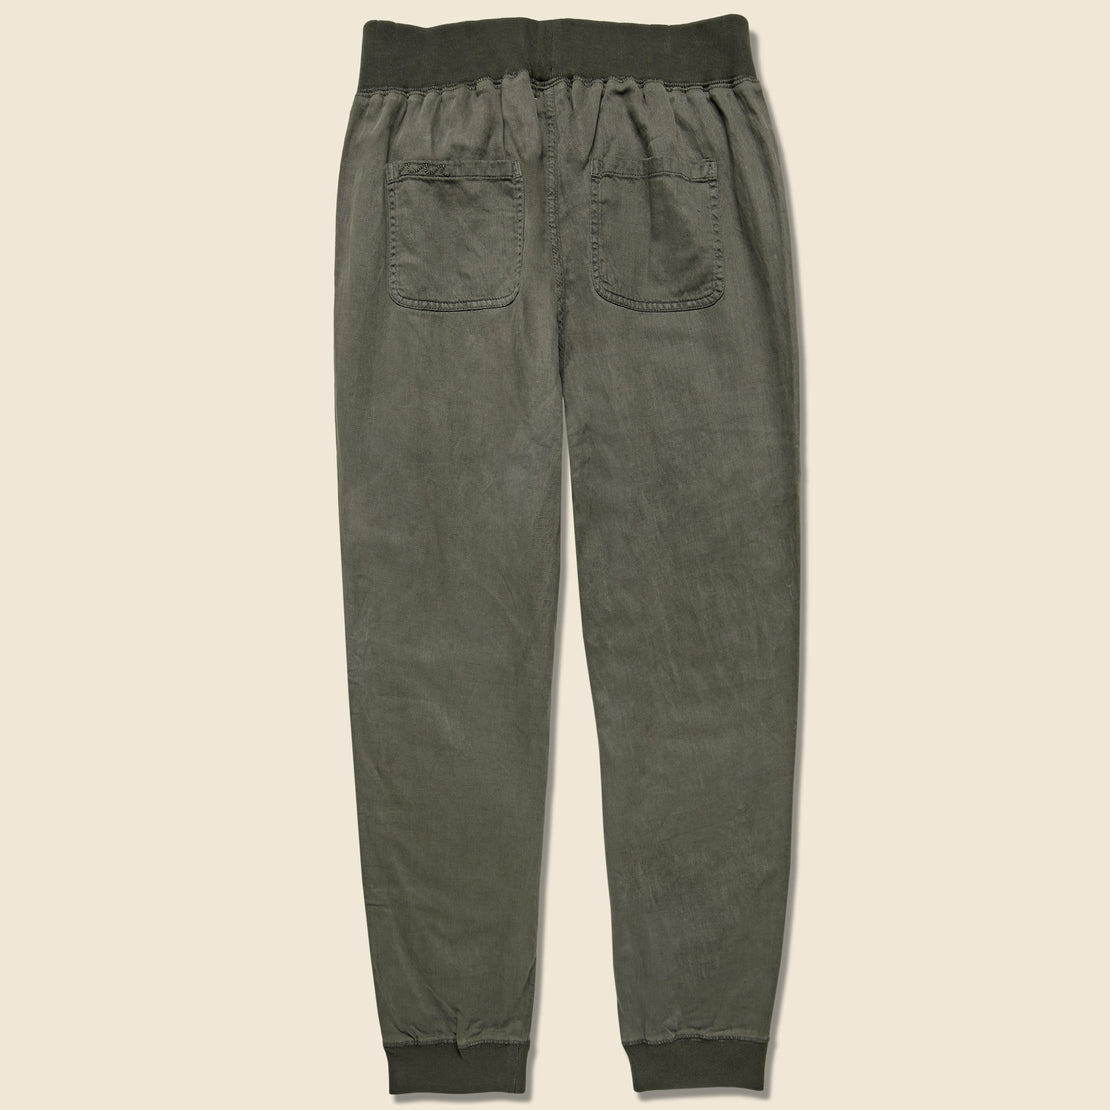 Arlie Day Pant - Hawkeye Green - Faherty - STAG Provisions - W - Pants - Twill